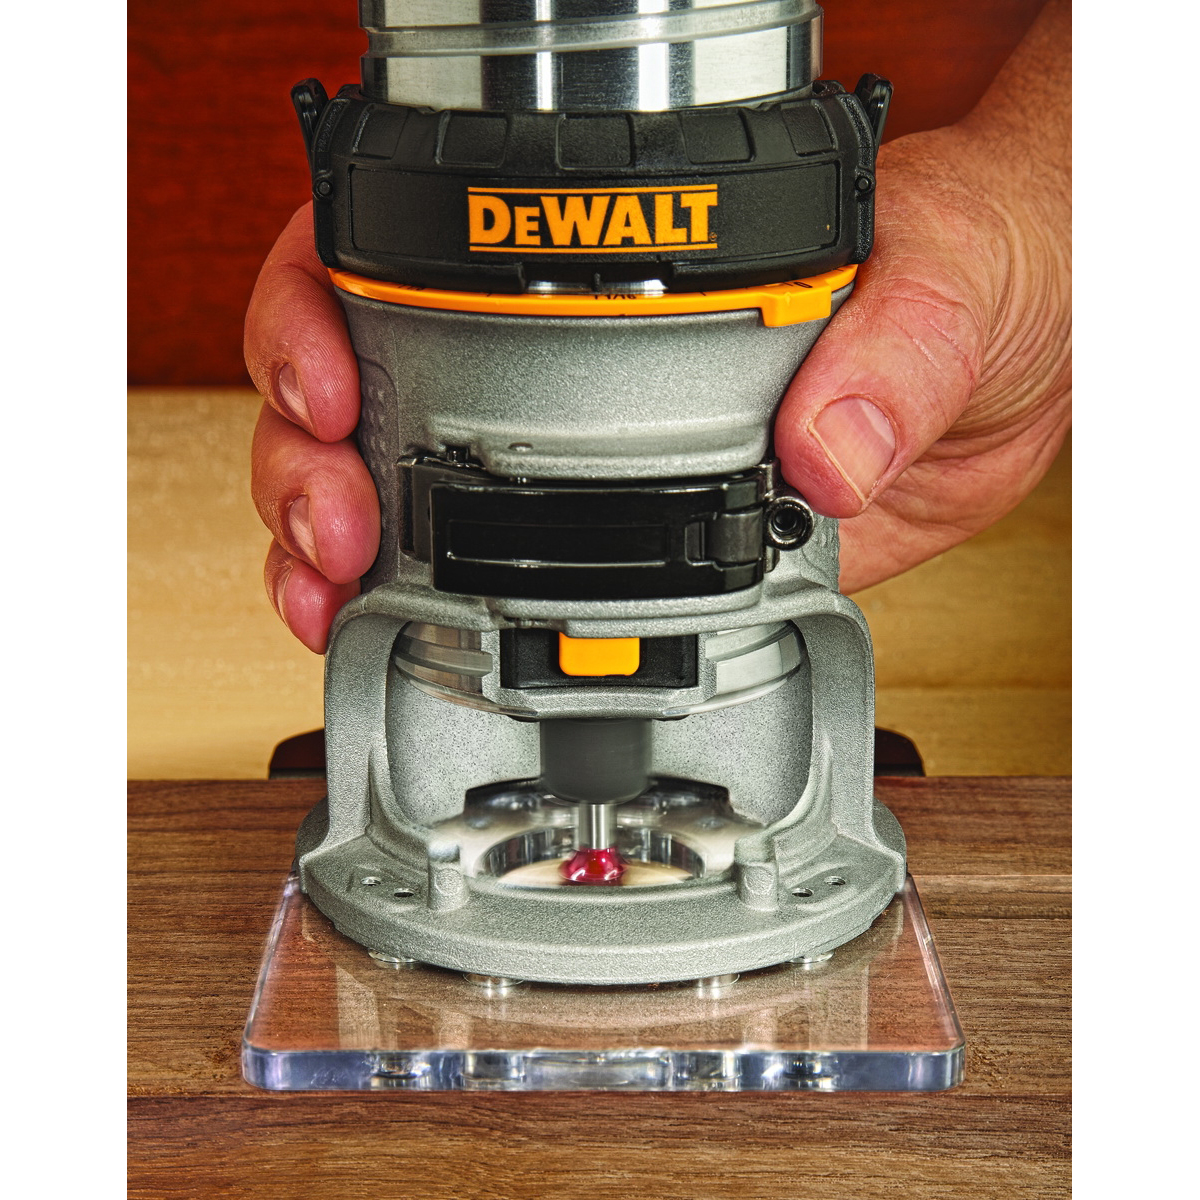 DeWALT DWP611 Compact Router with LED, 7 A, 16,000 to 27,000 rpm Load Speed, 1-1/2 in Max Stroke - 3